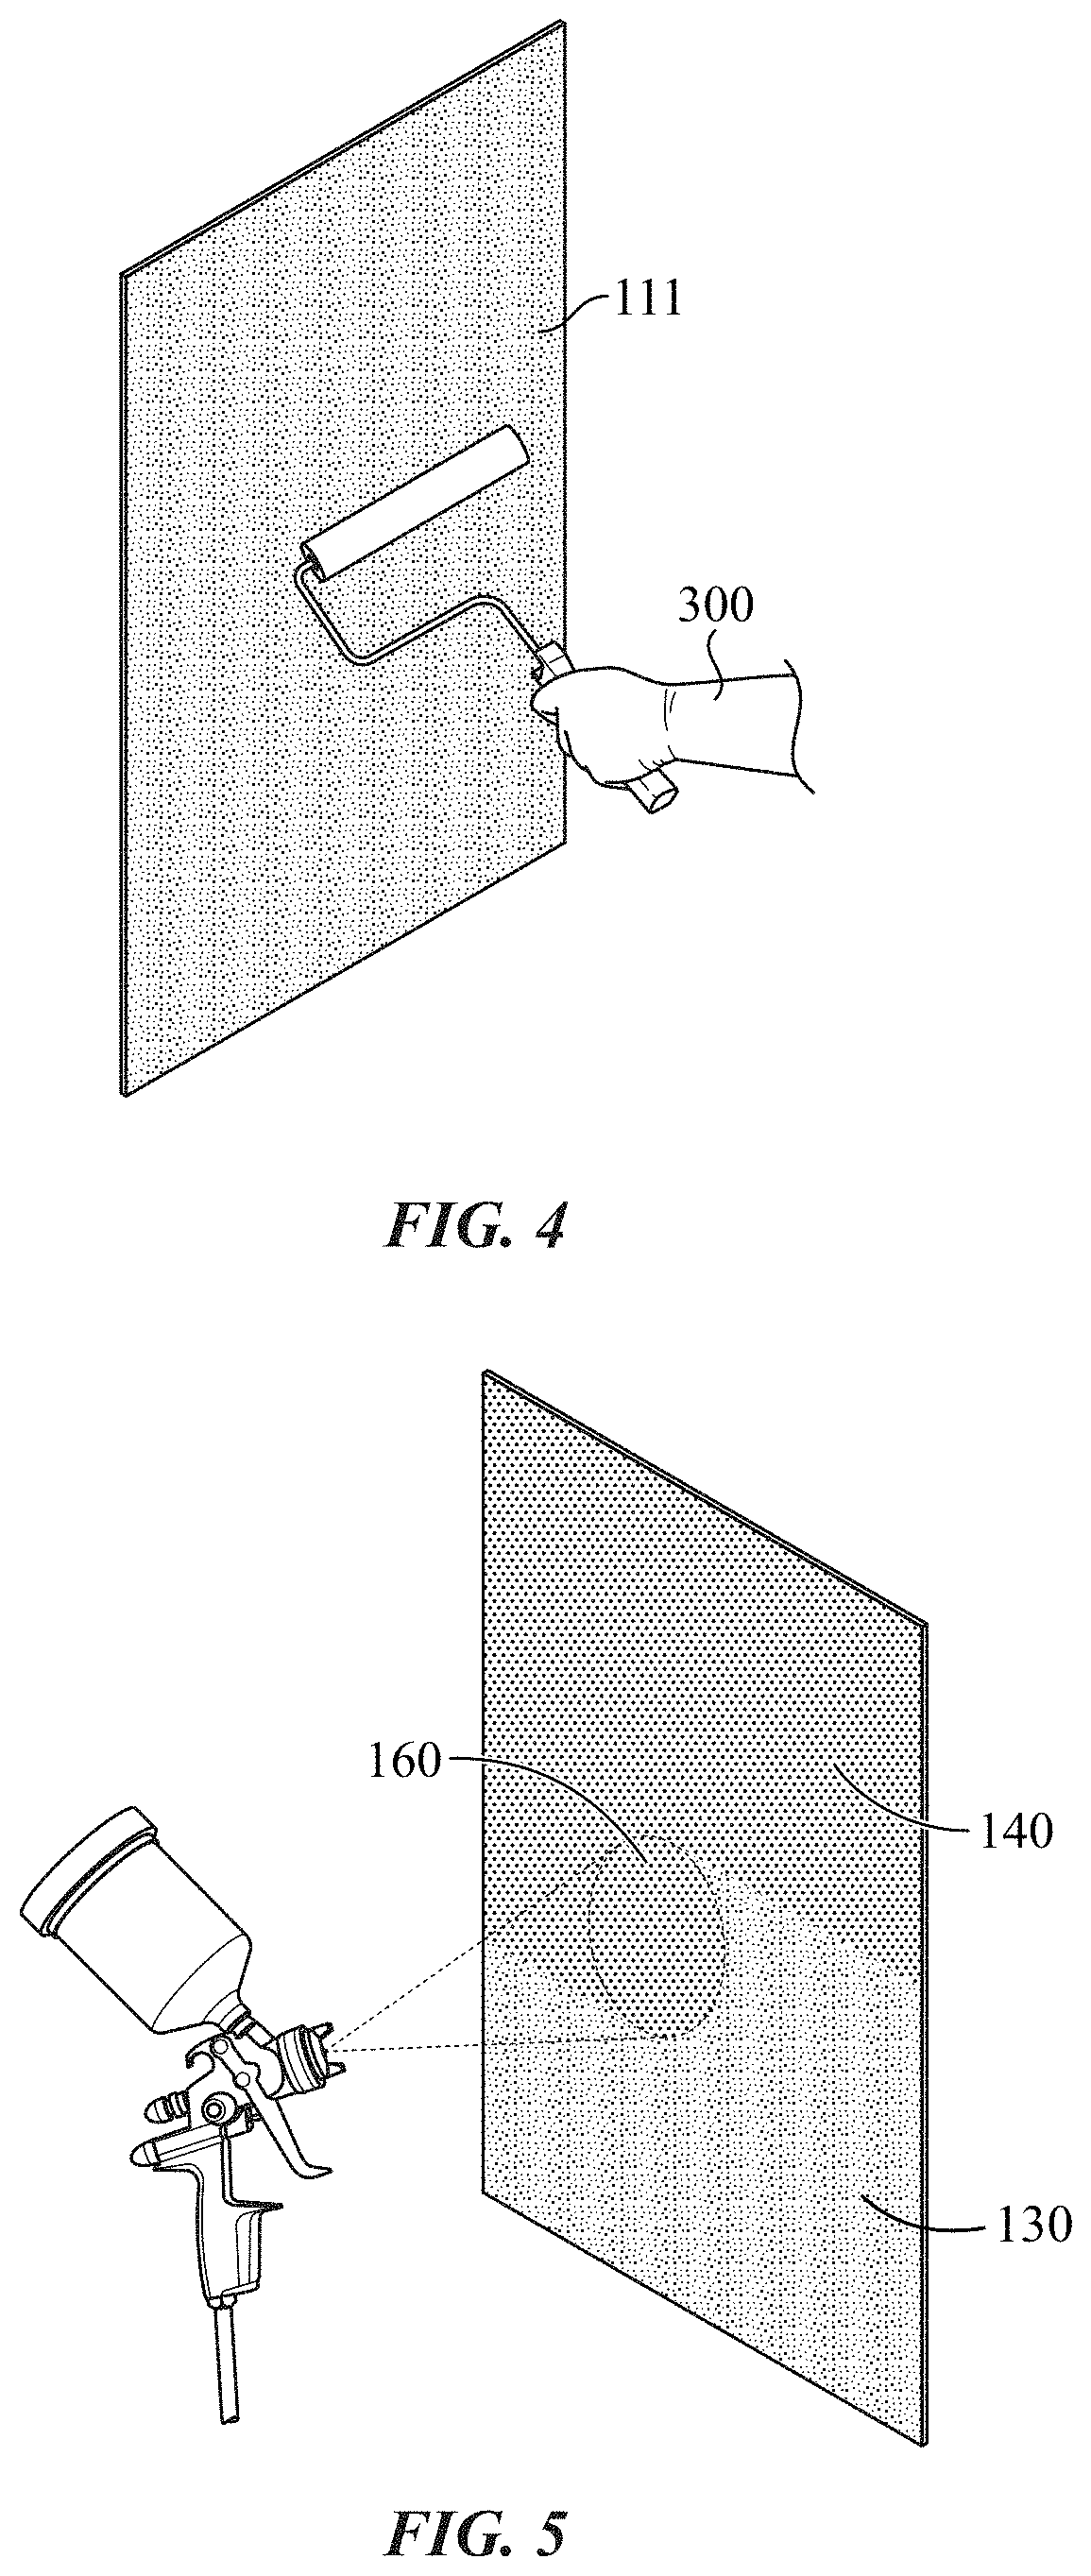 Erasable watermedia surface system and method of use